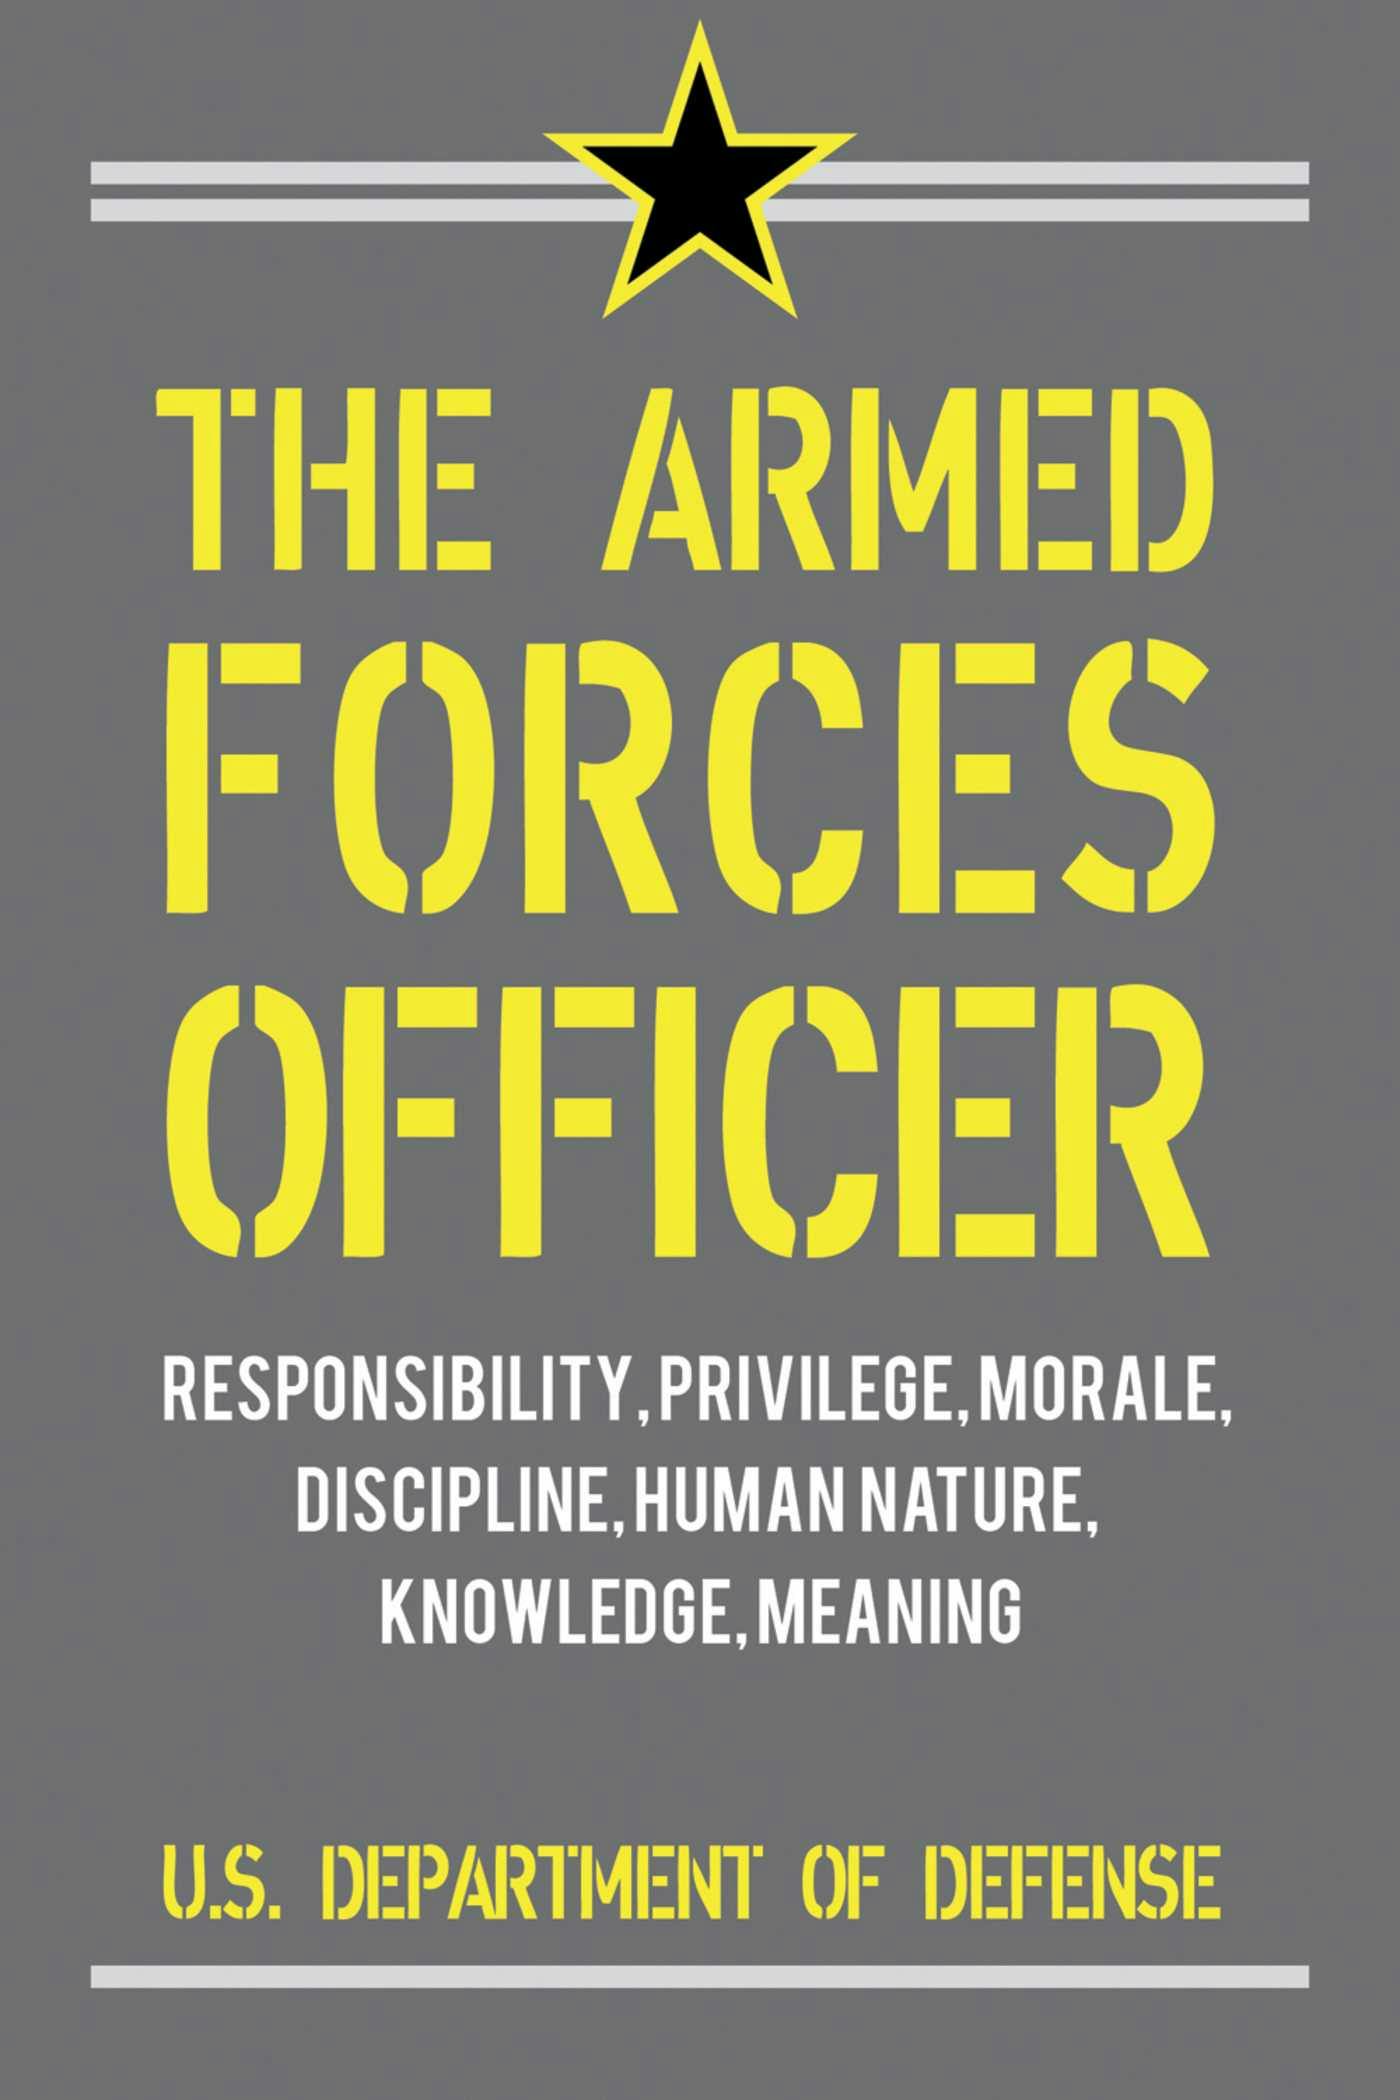 The Armed Forces Officer: Essays on Leadership, Command, Oath, and Service Identity - Albert C. Pierce, Richard Swain